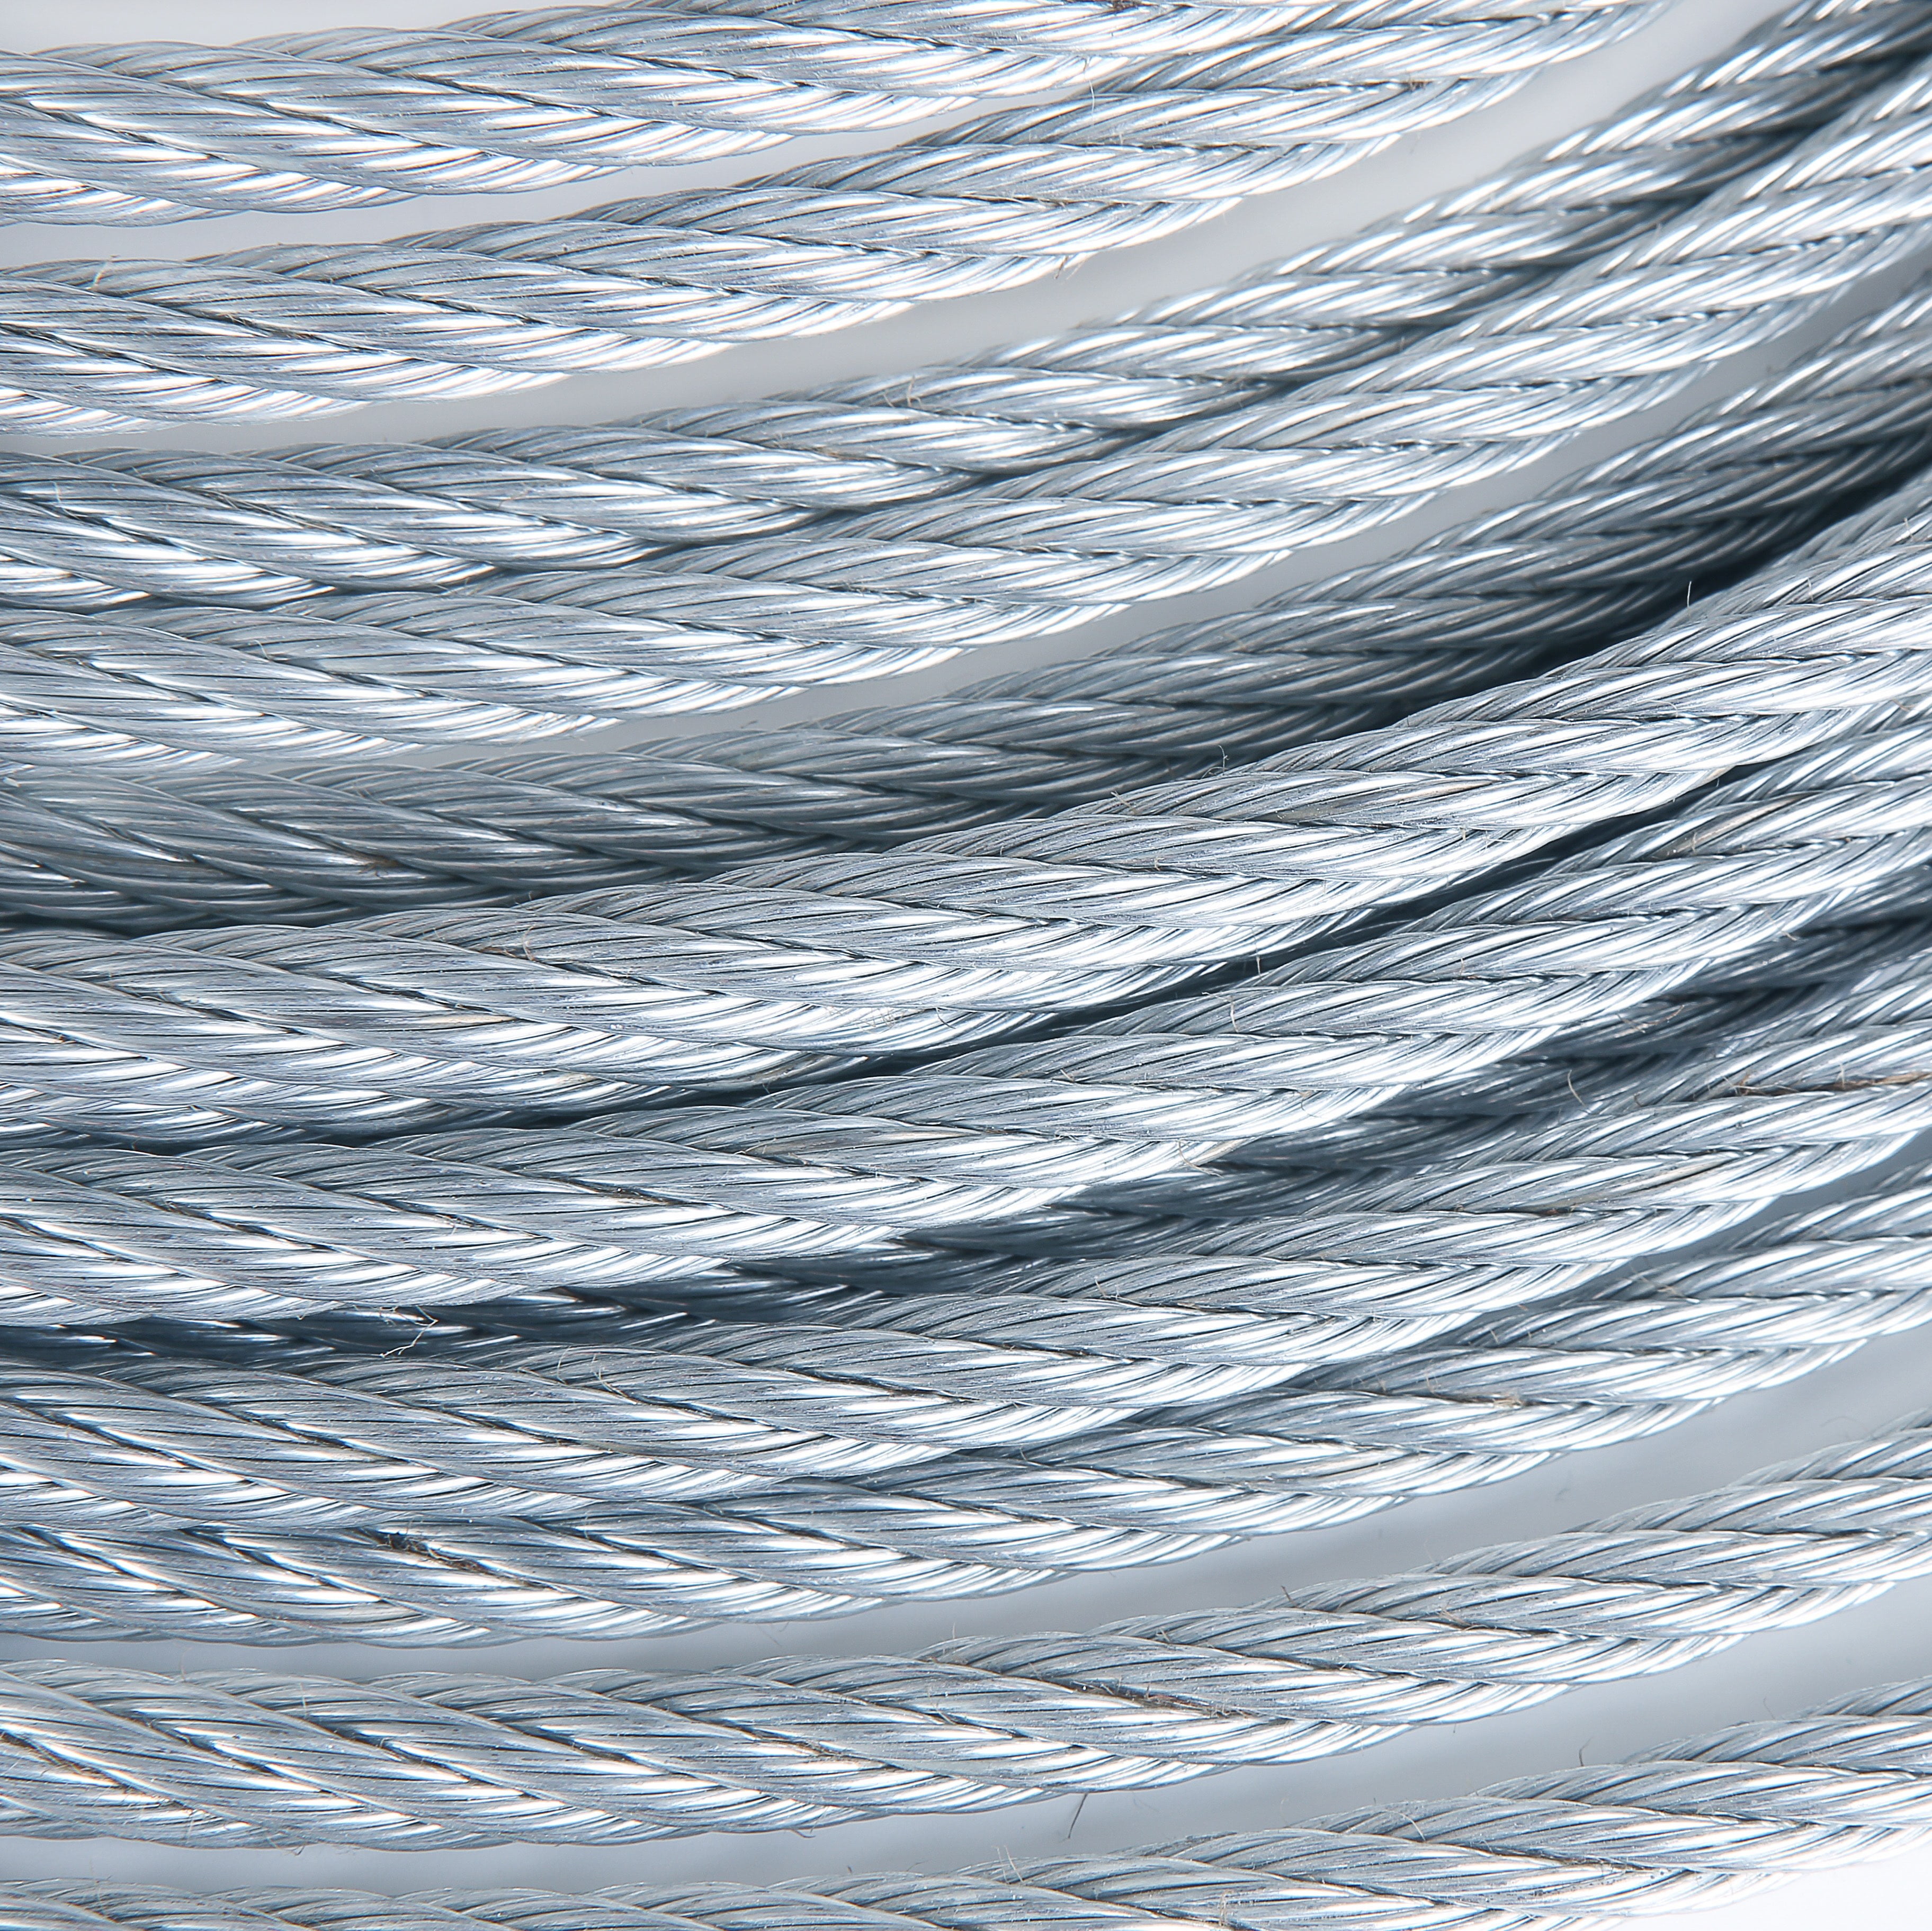 100 ft T-304 Grade 7 x 19 Stainless Steel Cable Wire Rope 1/4 